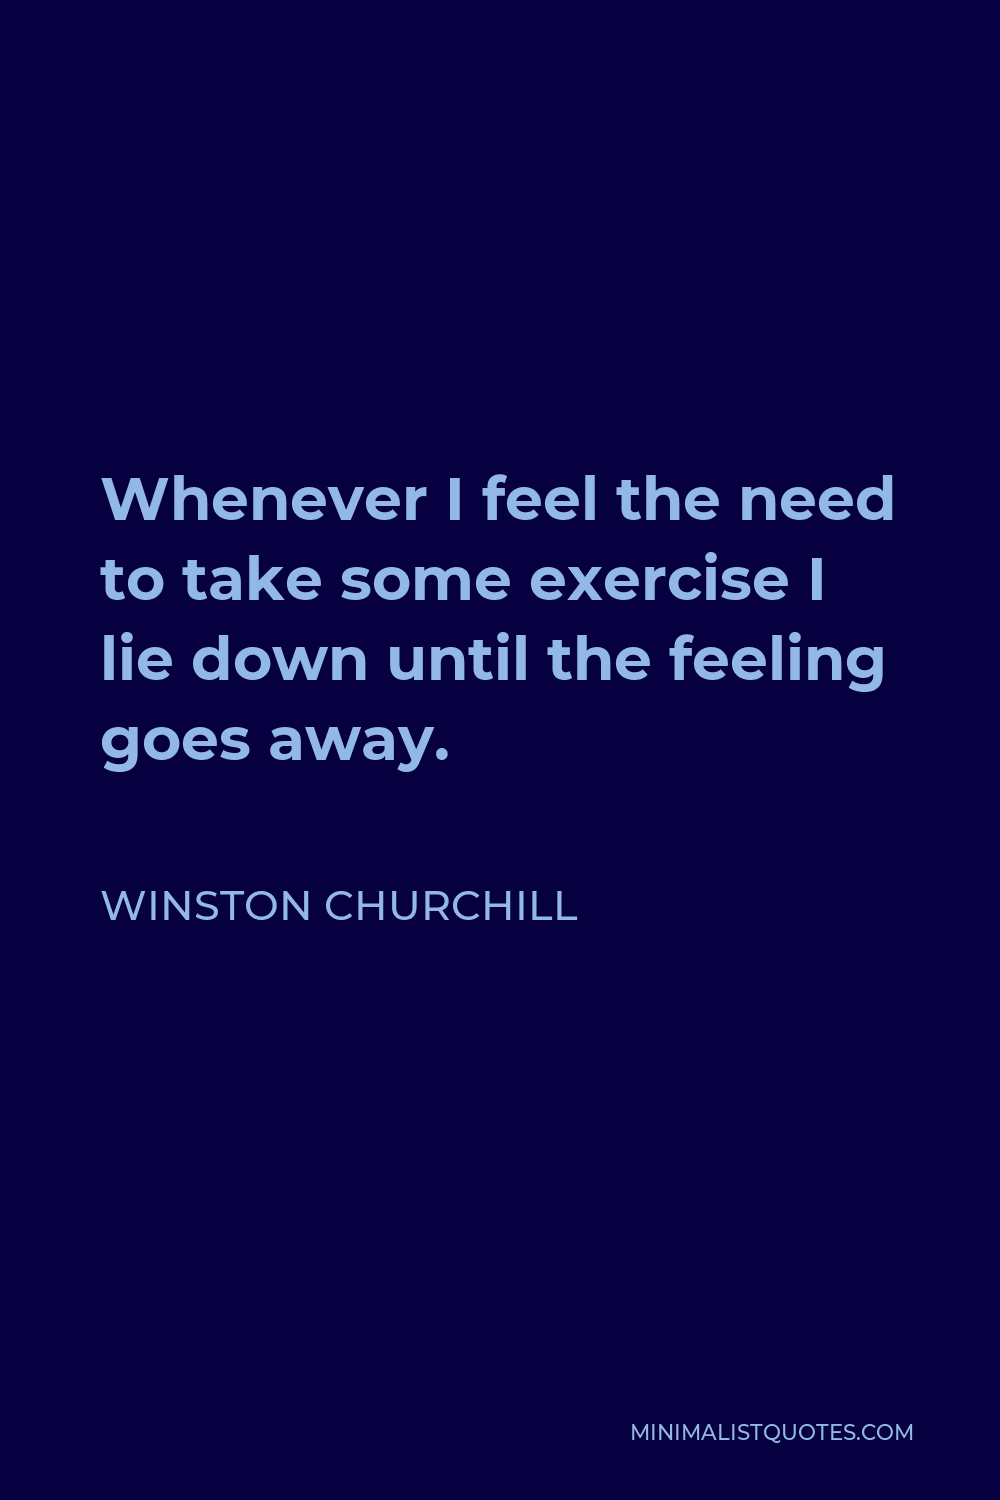 Winston Churchill Quote - Whenever I feel the need to take some exercise I lie down until the feeling goes away.